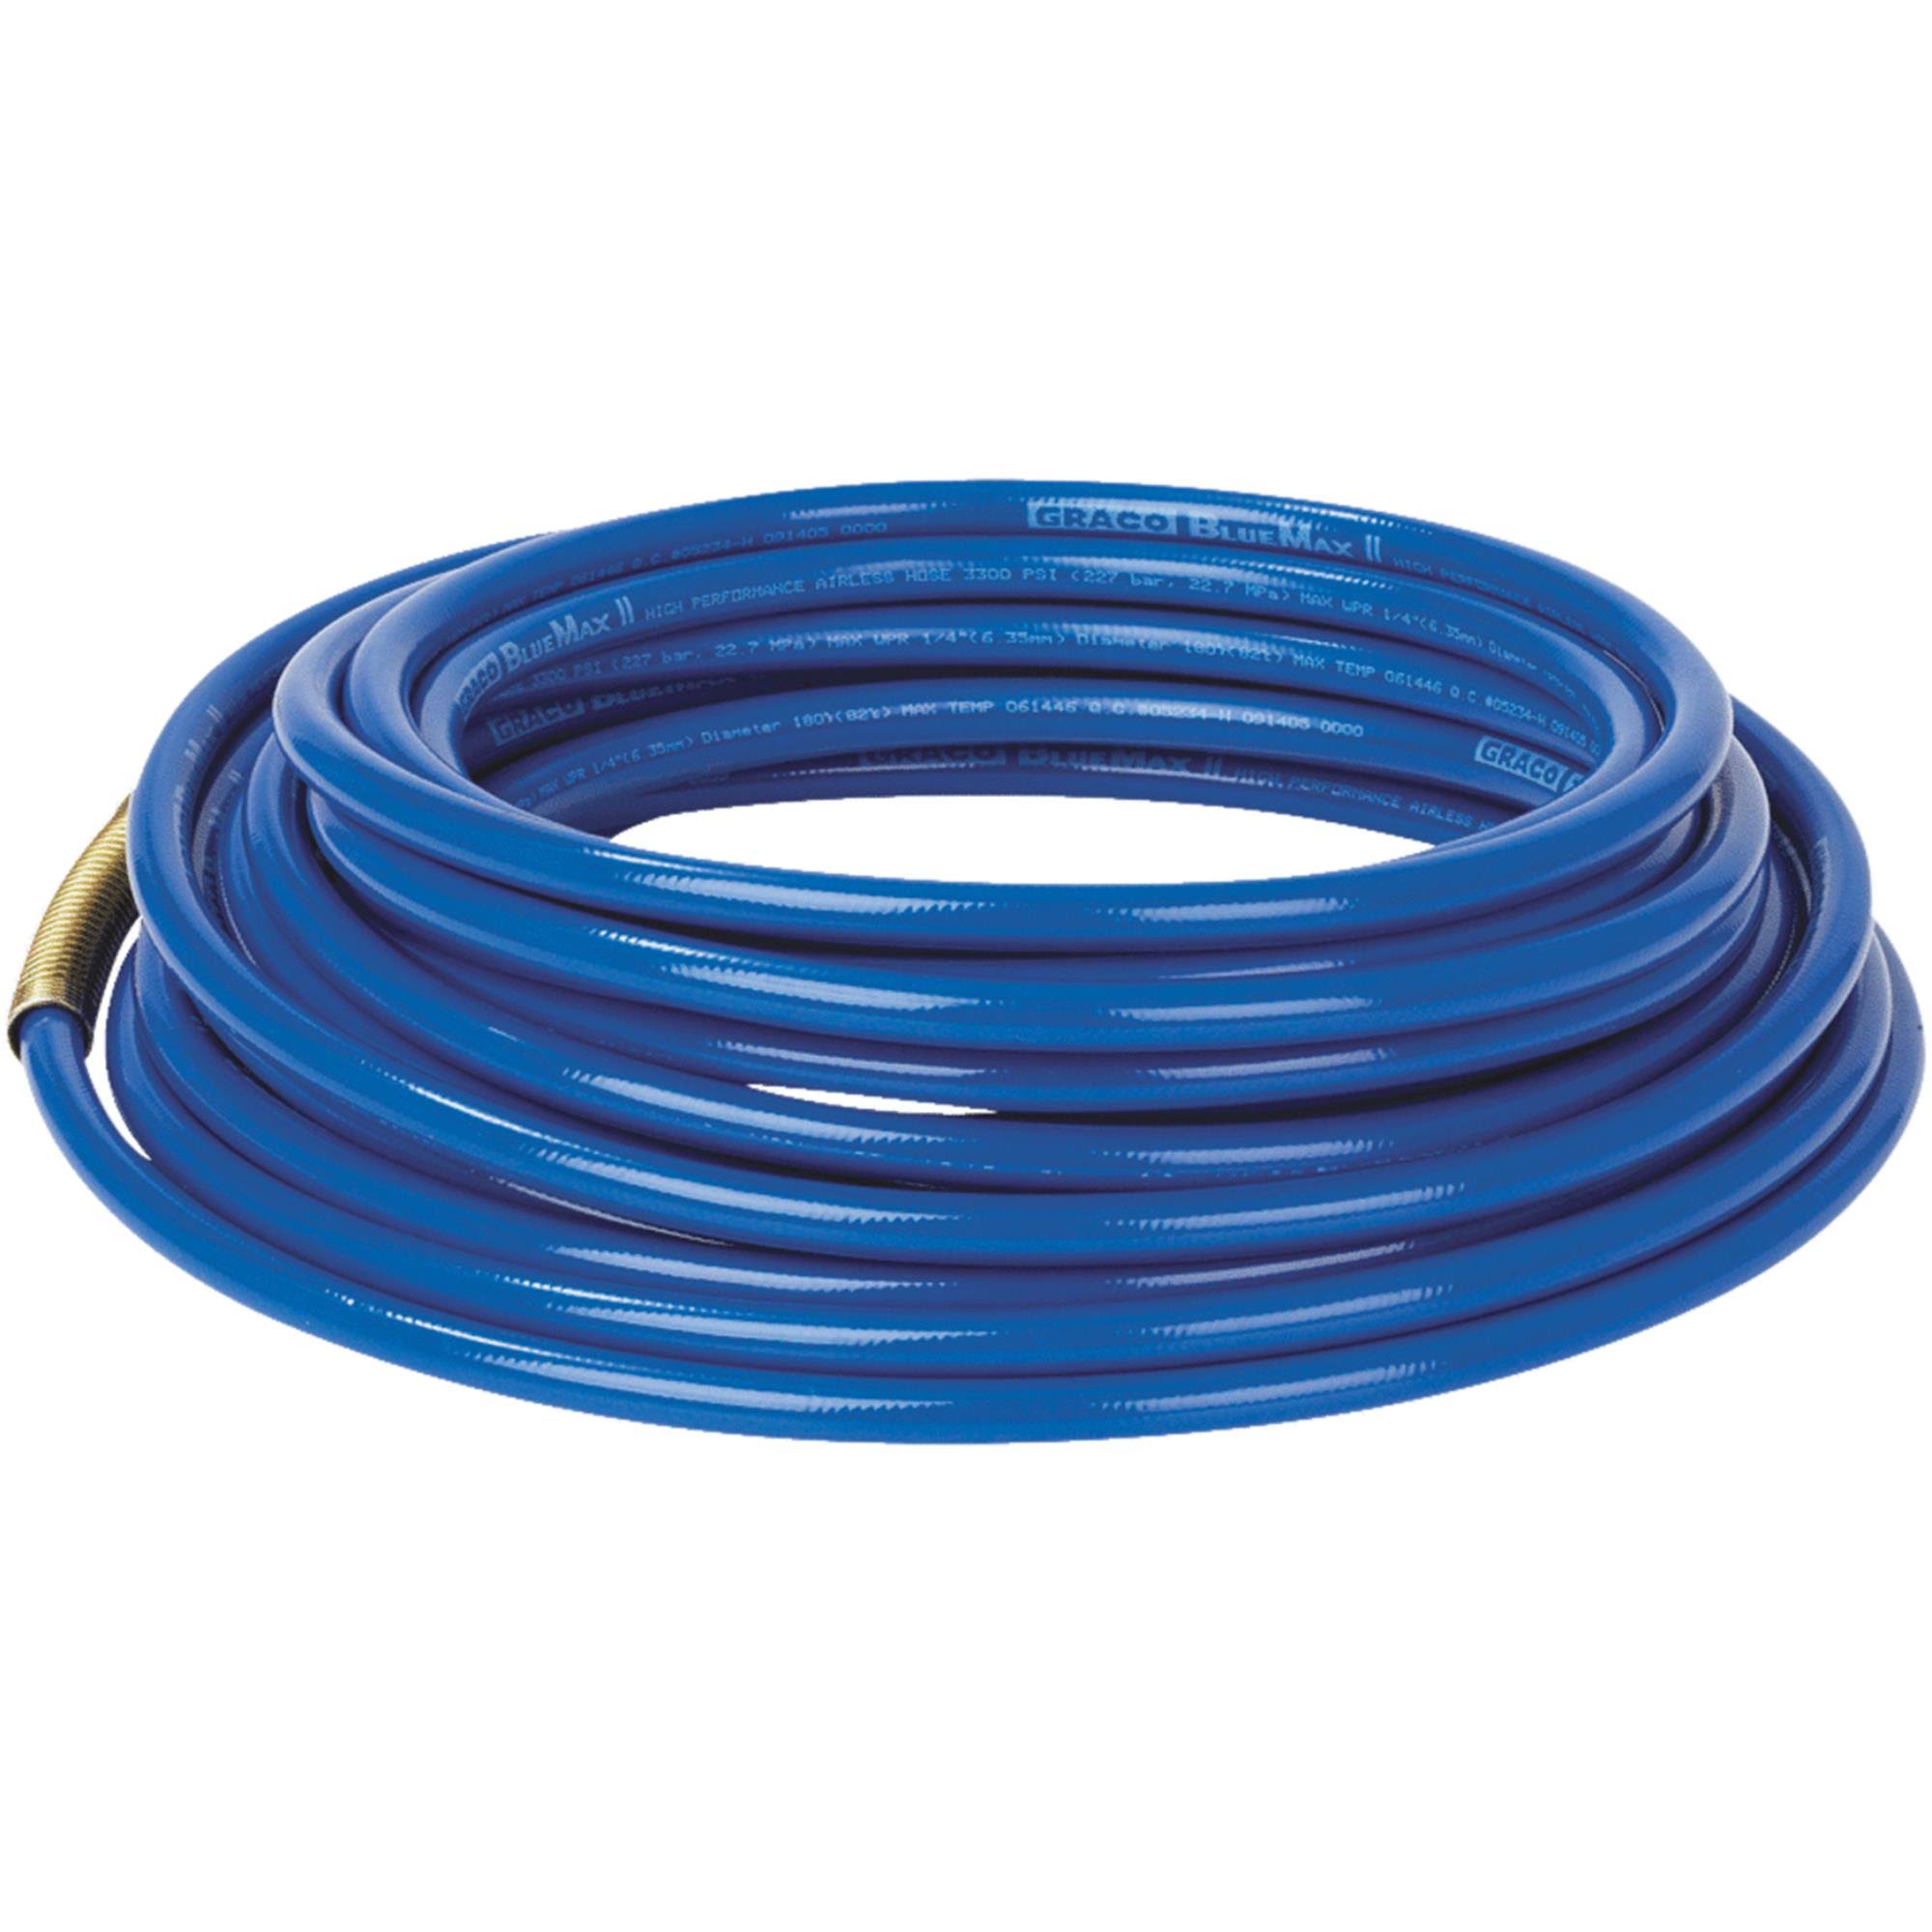 Graco 240794 BlueMax II Hose - For Airless Paint, Blue, ewe1/4"x50', 3300 PSI